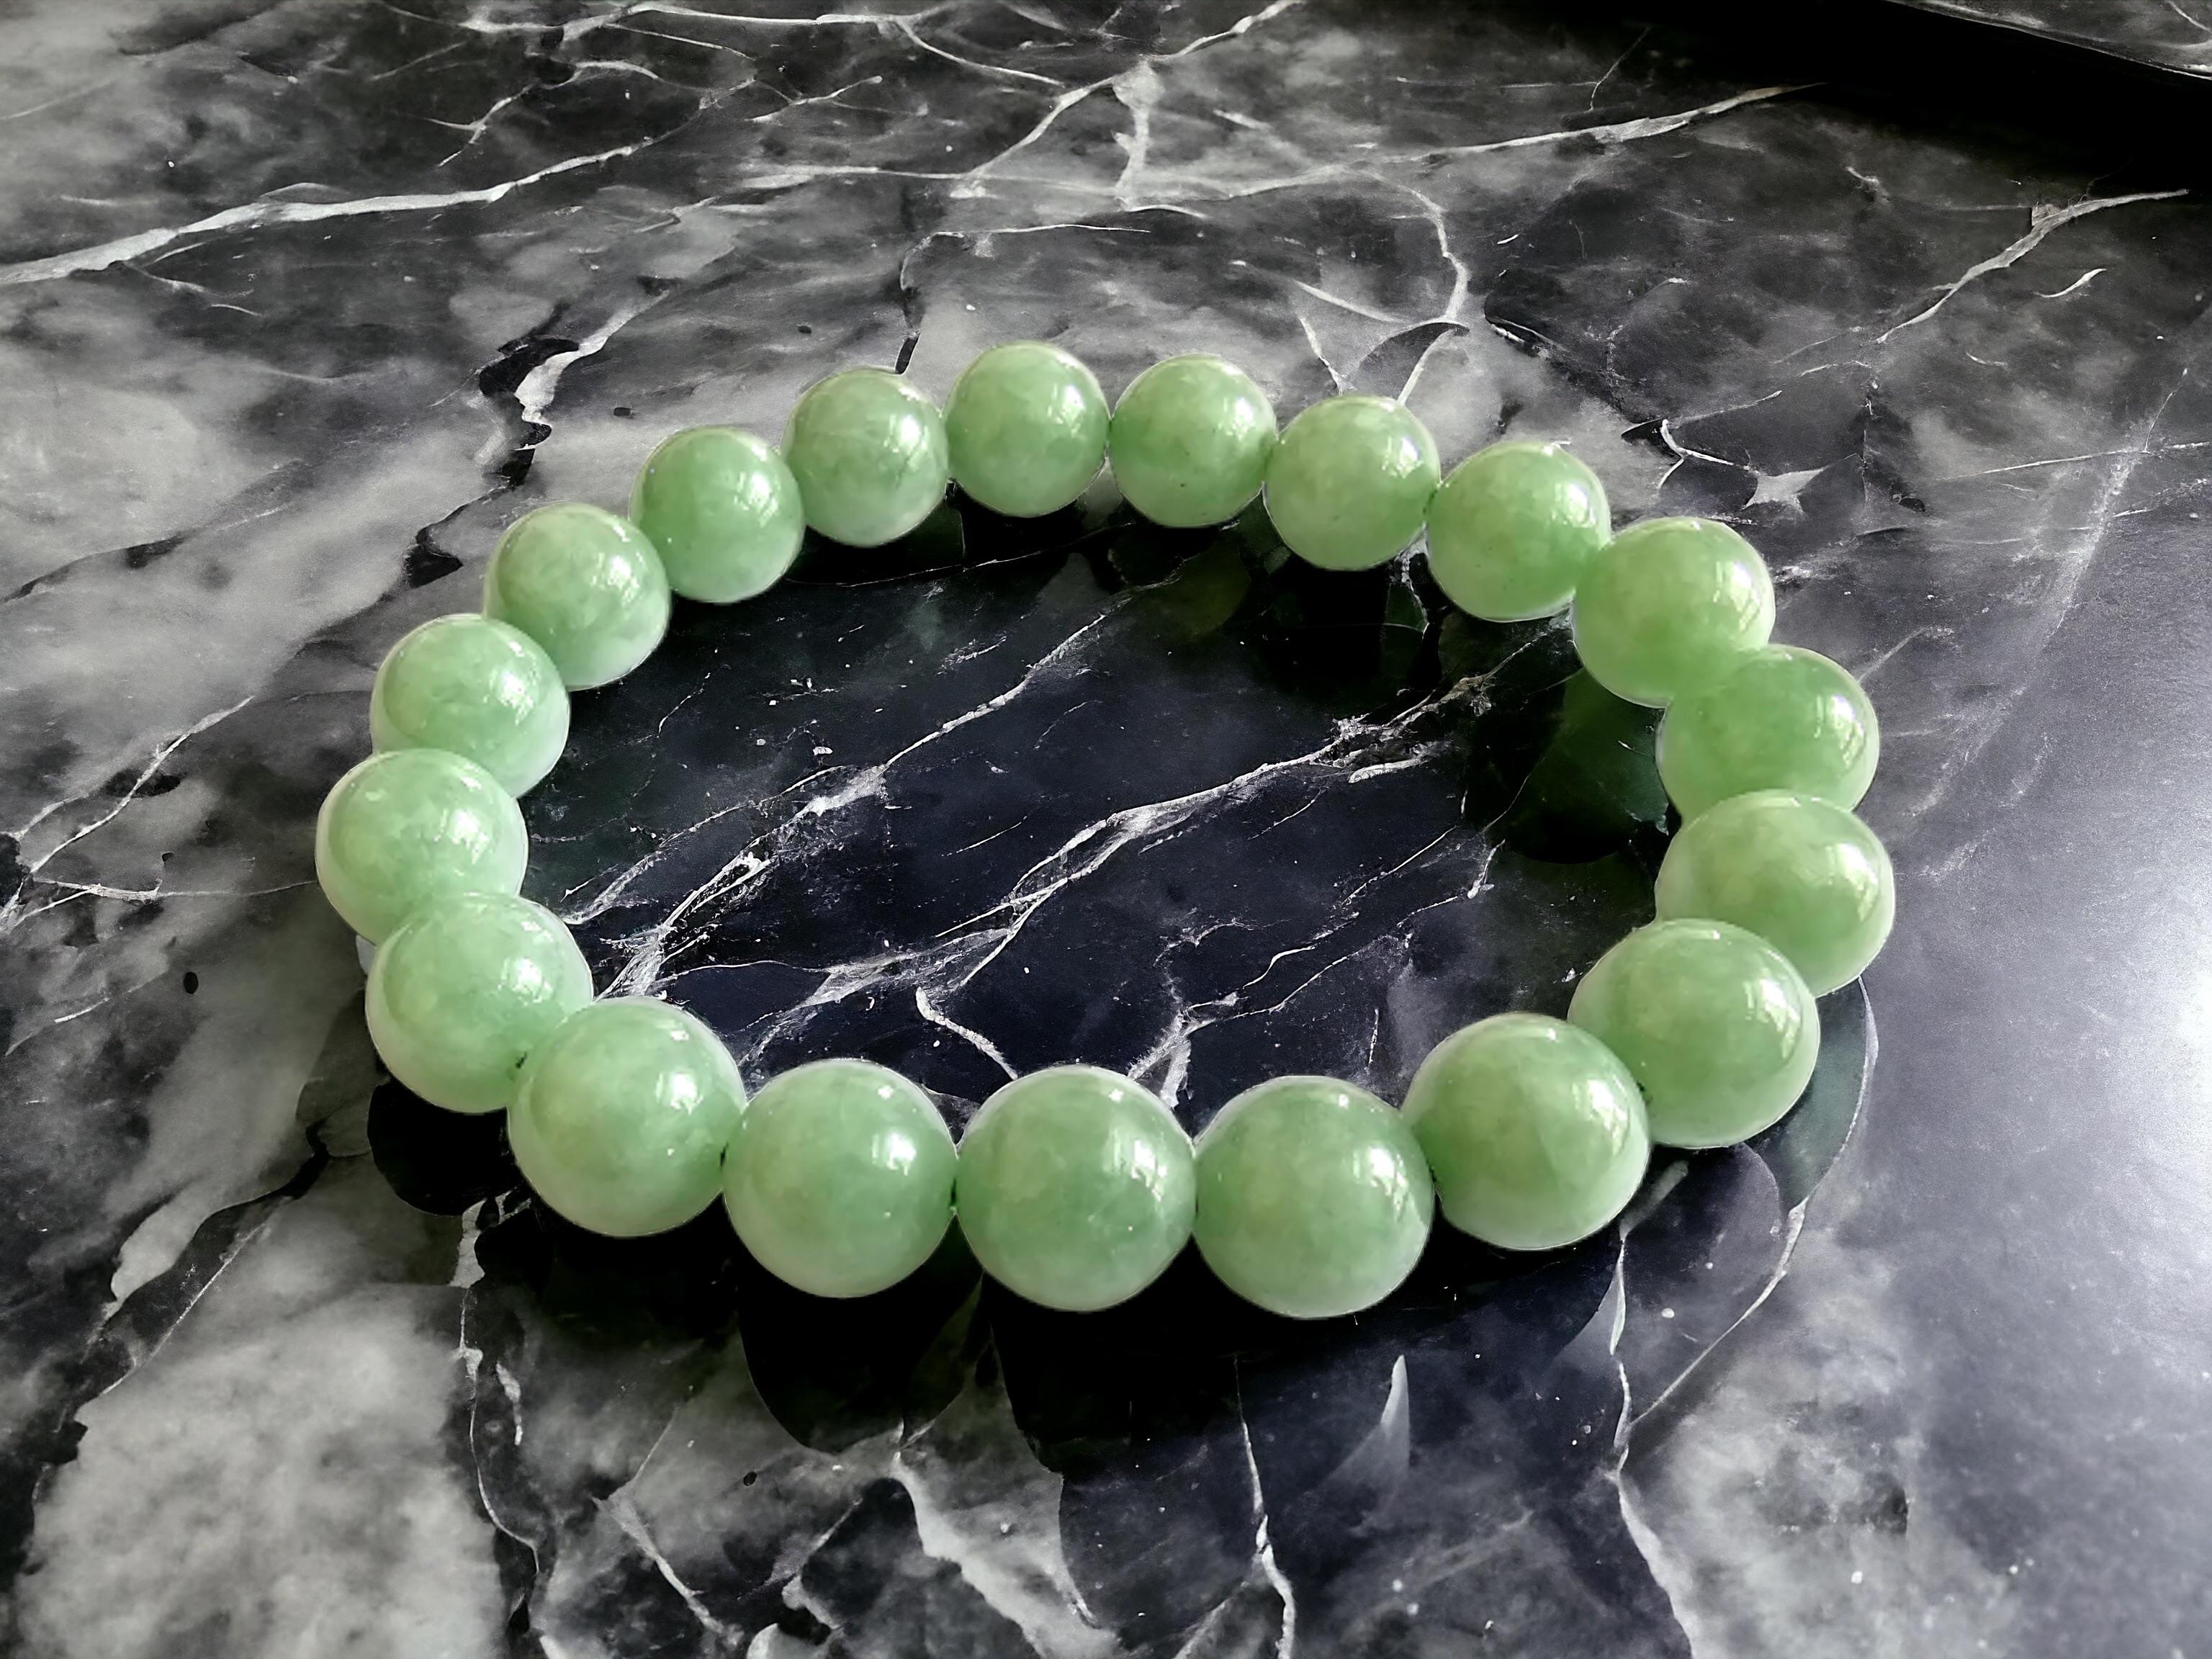 Imperial Green Burmese A-Jade Jadeite Beaded Bracelet (10mm Each x 19 beads) 05002

10mm each, 19 perfectly calibrated Green Jadeite Beads. Some of the rarest naturally occurring hues of A-Jadeite, calibrated Green creates a visually stunning